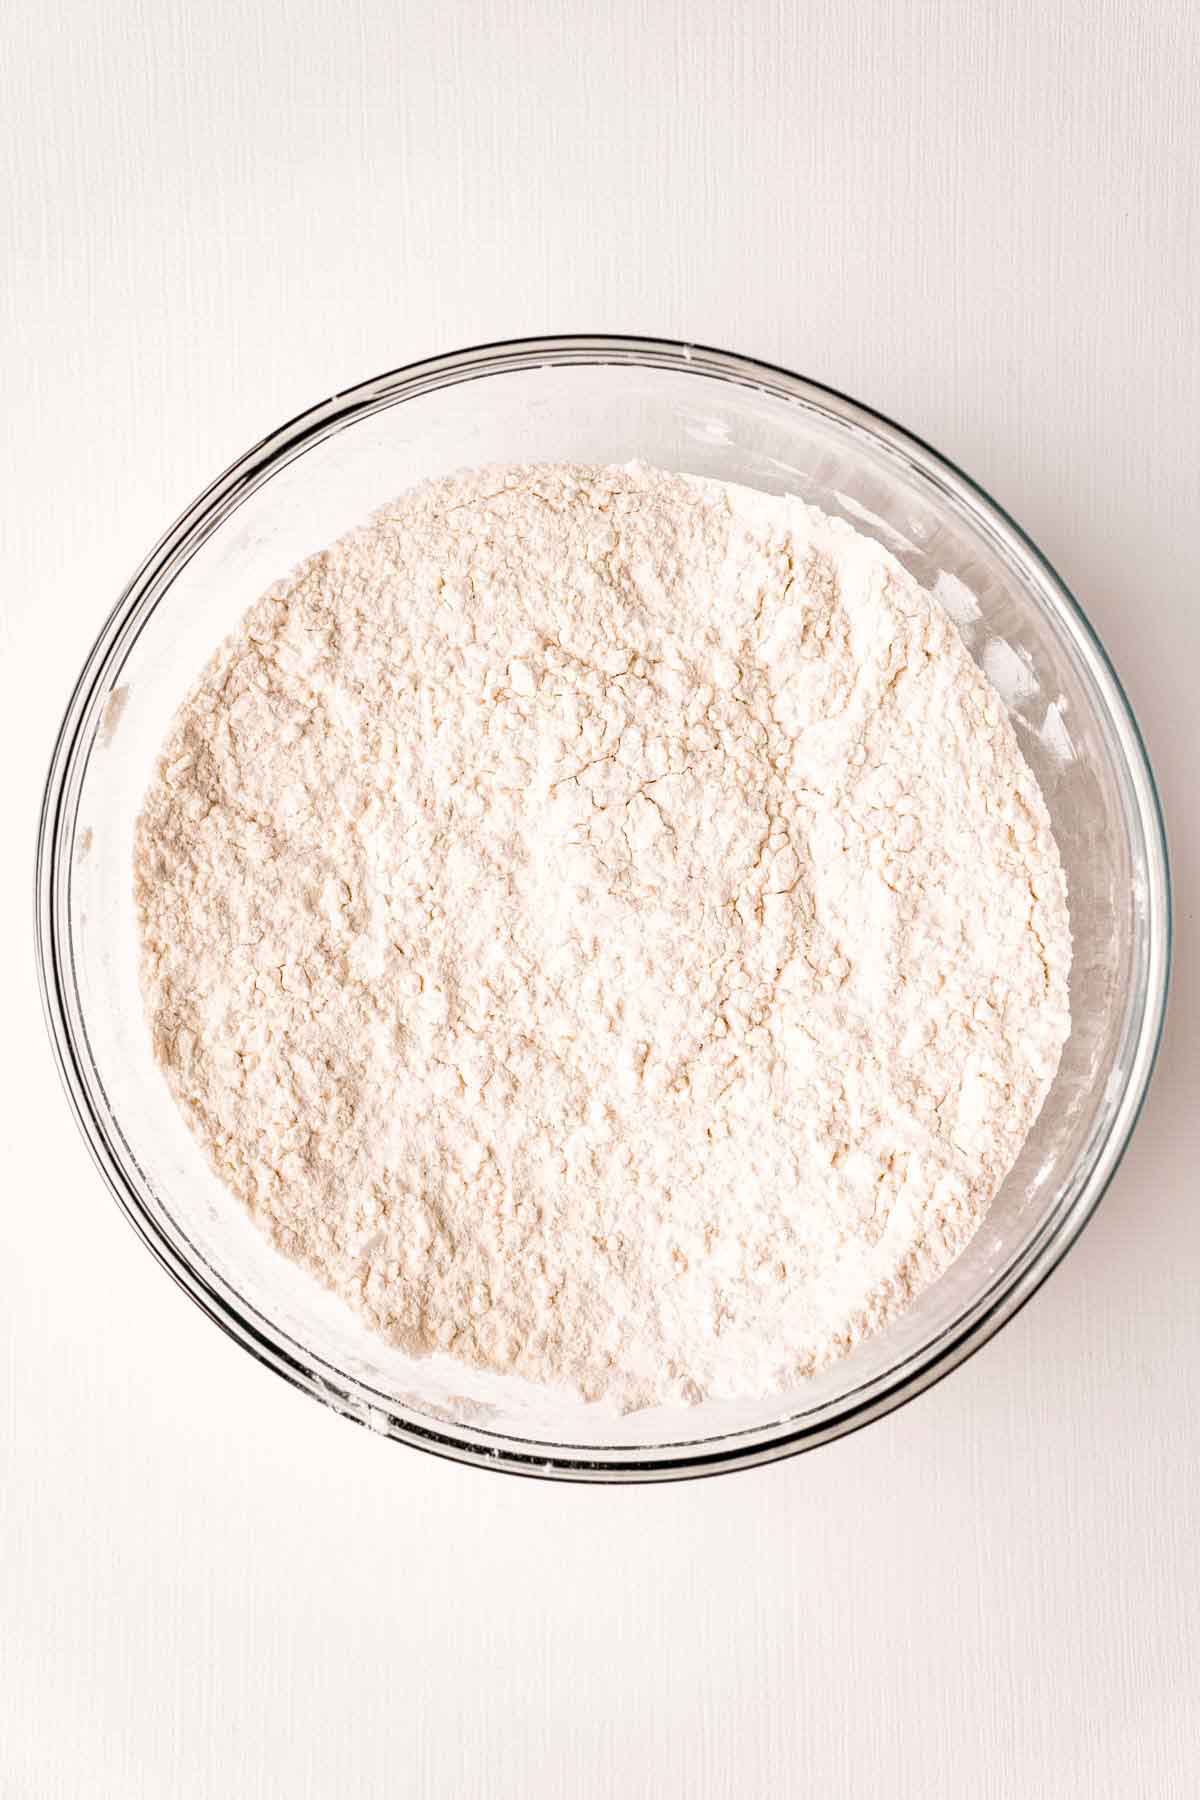 mixing bowl with flour and other dry ingredients